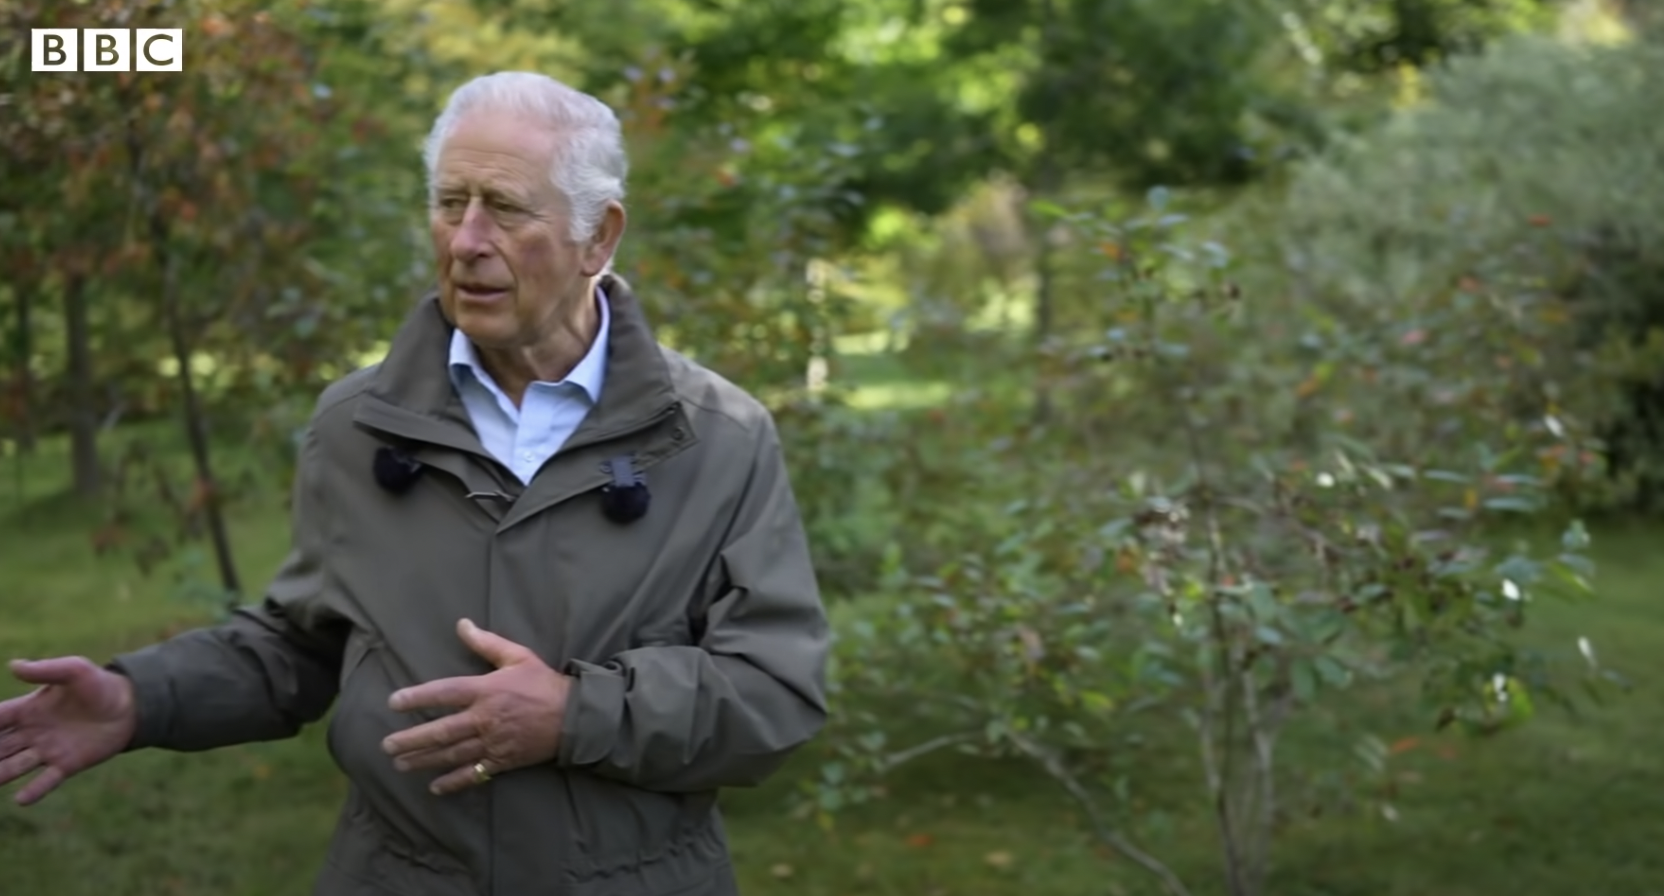 King Charles III during an interview in the garden in Balmoral Estate, dated 2022 | Source: YouTube/BBC News